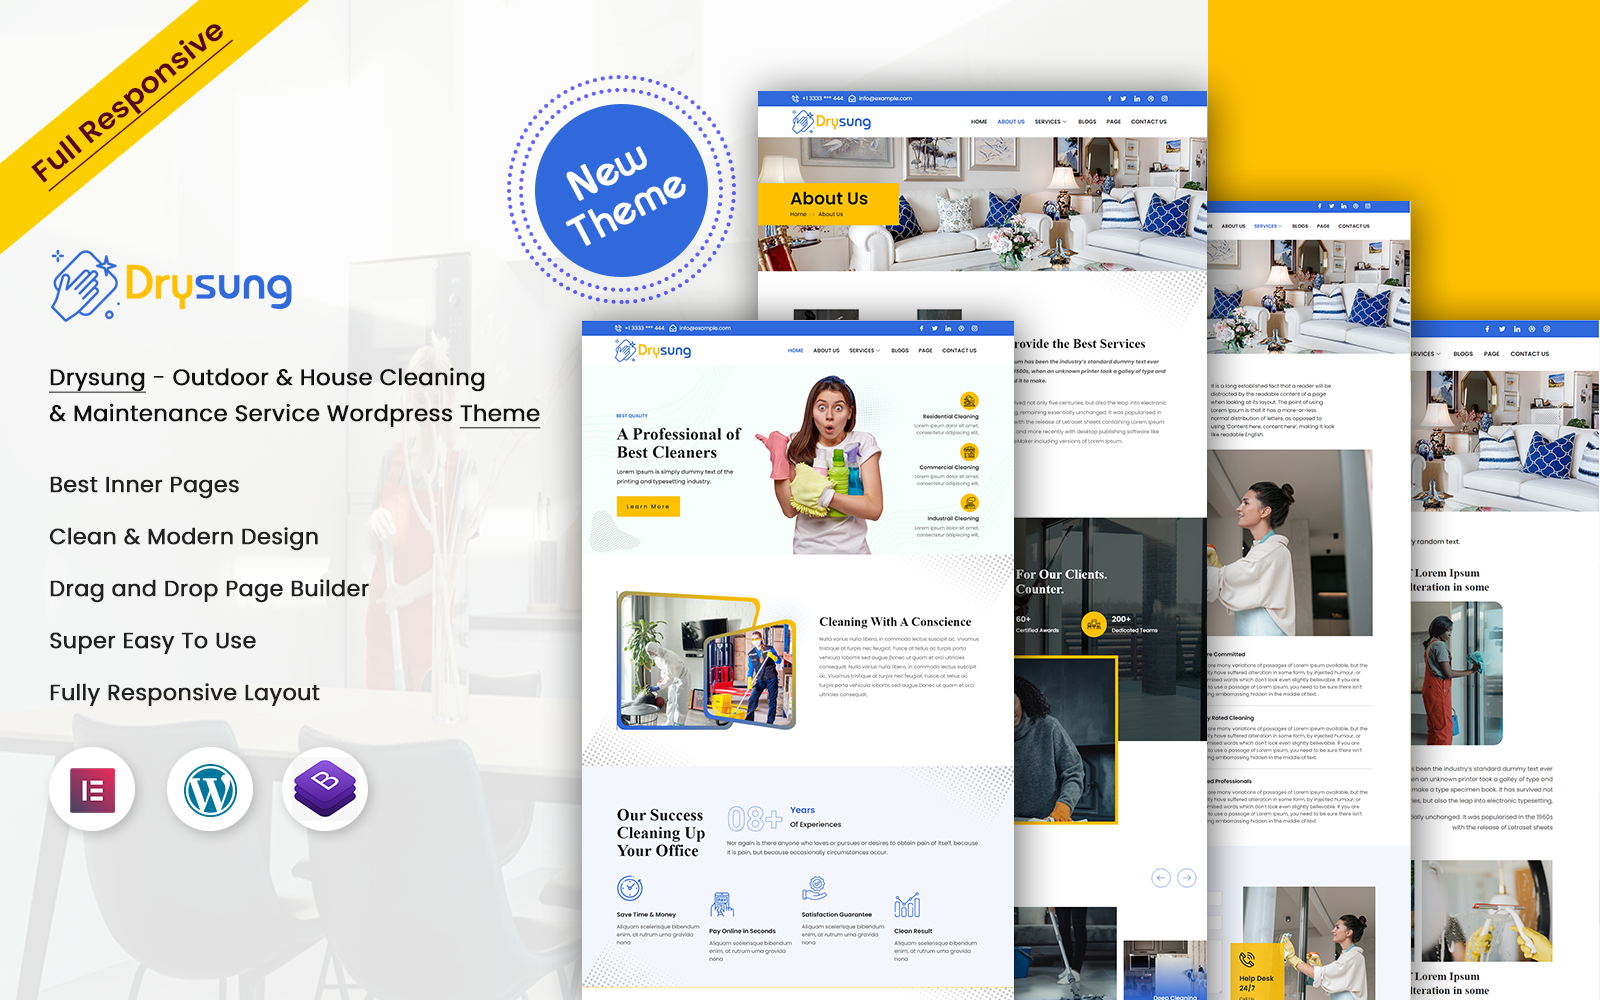 Drysung - Outdoor & House Cleaning & Maintenance Service Wordpress Theme